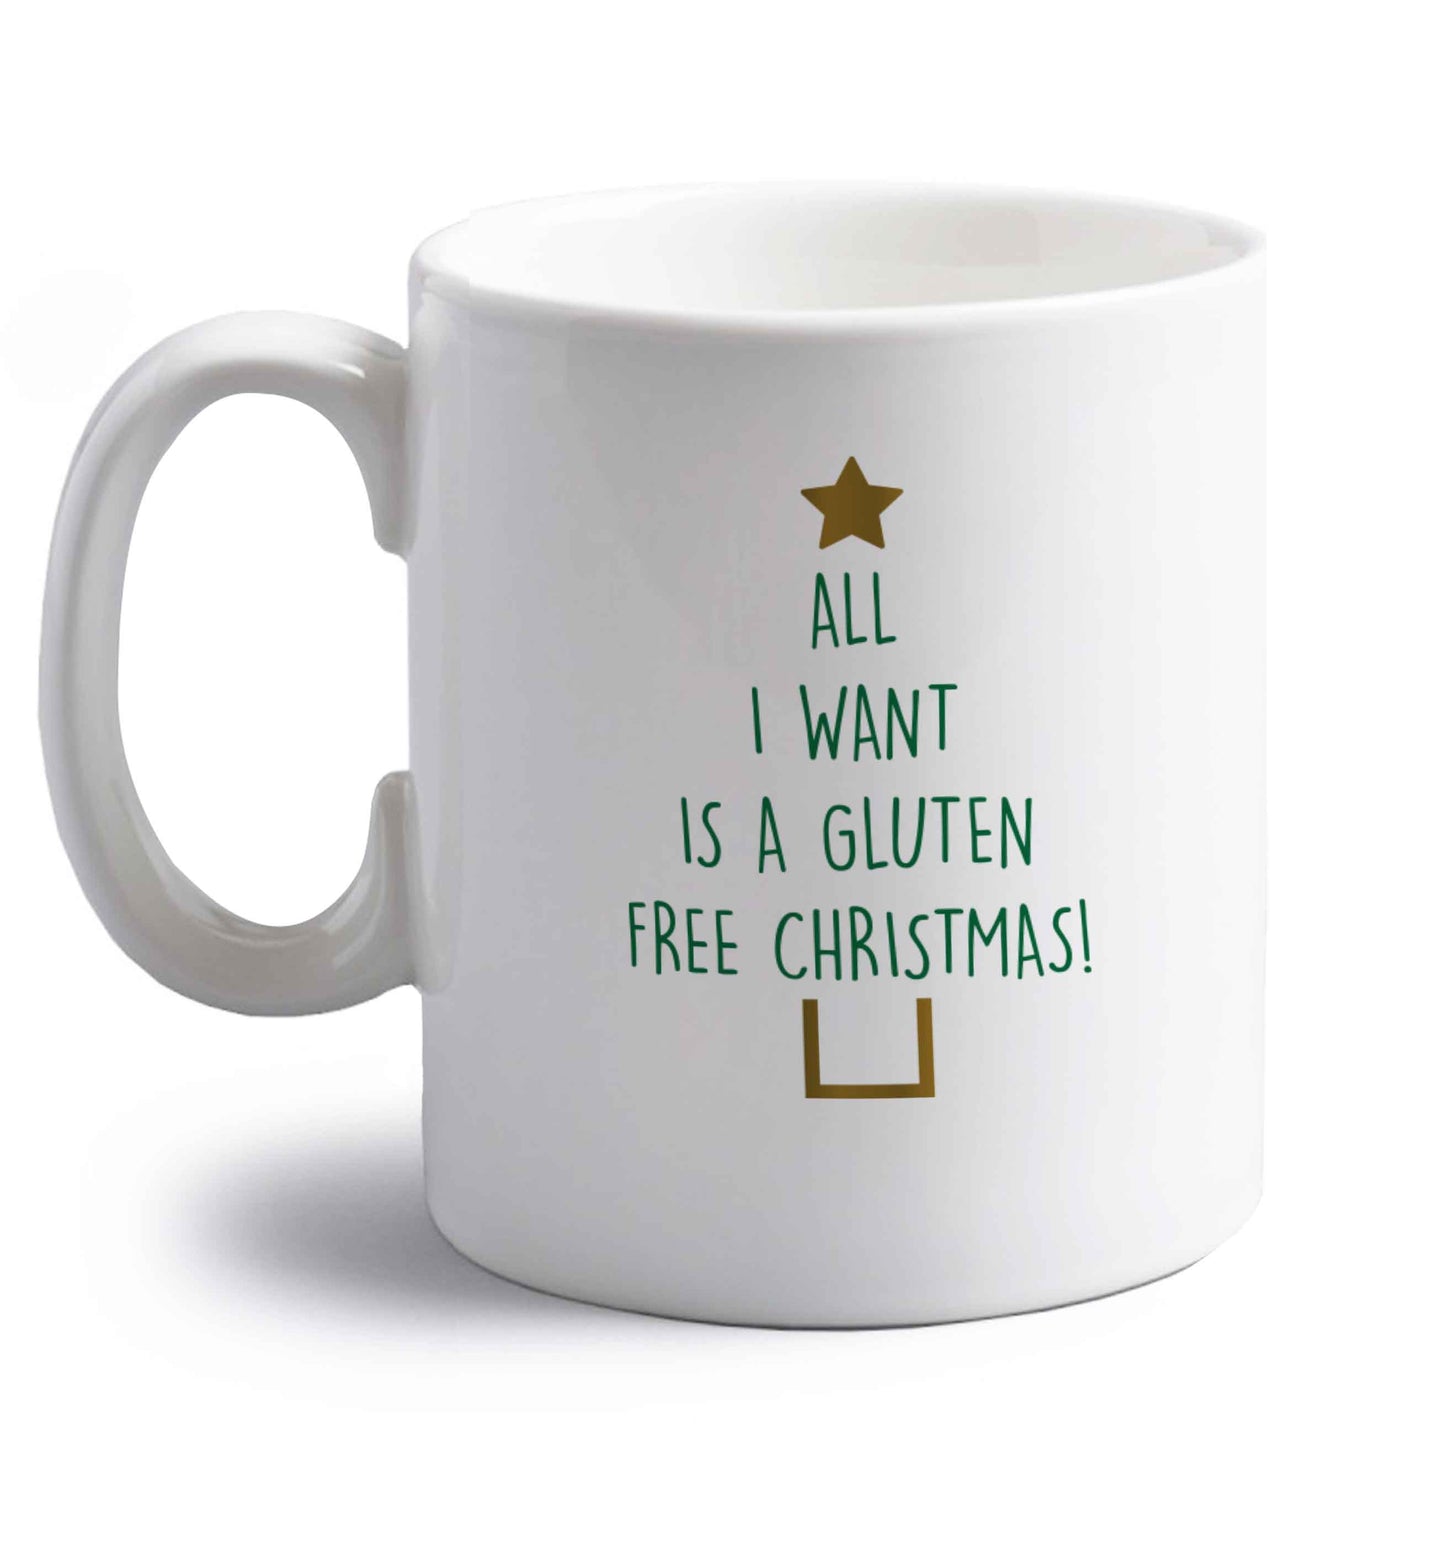 All I want is a gluten free Christmas right handed white ceramic mug 